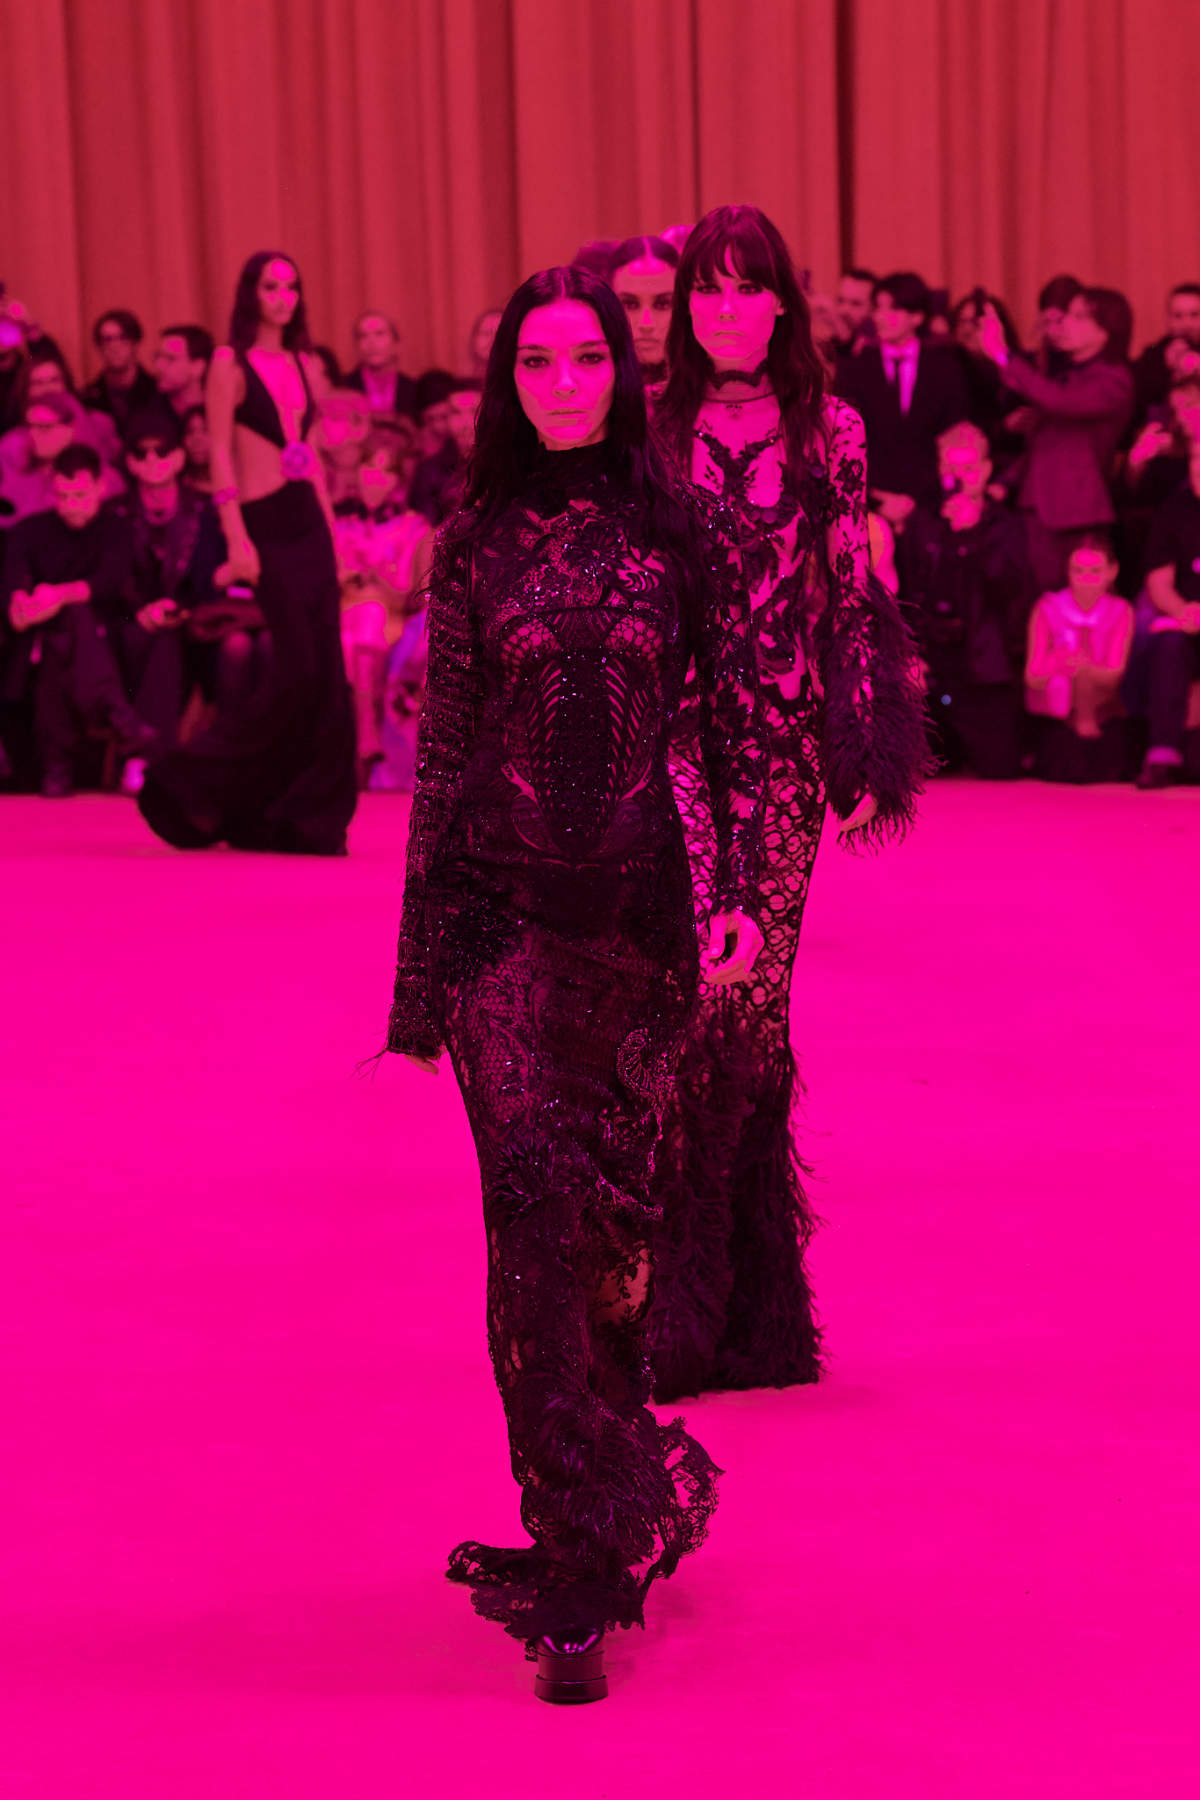 Roberto Cavalli Presents Its New Women’s Collection Fall/Winter 2023-2024: She’s Wild